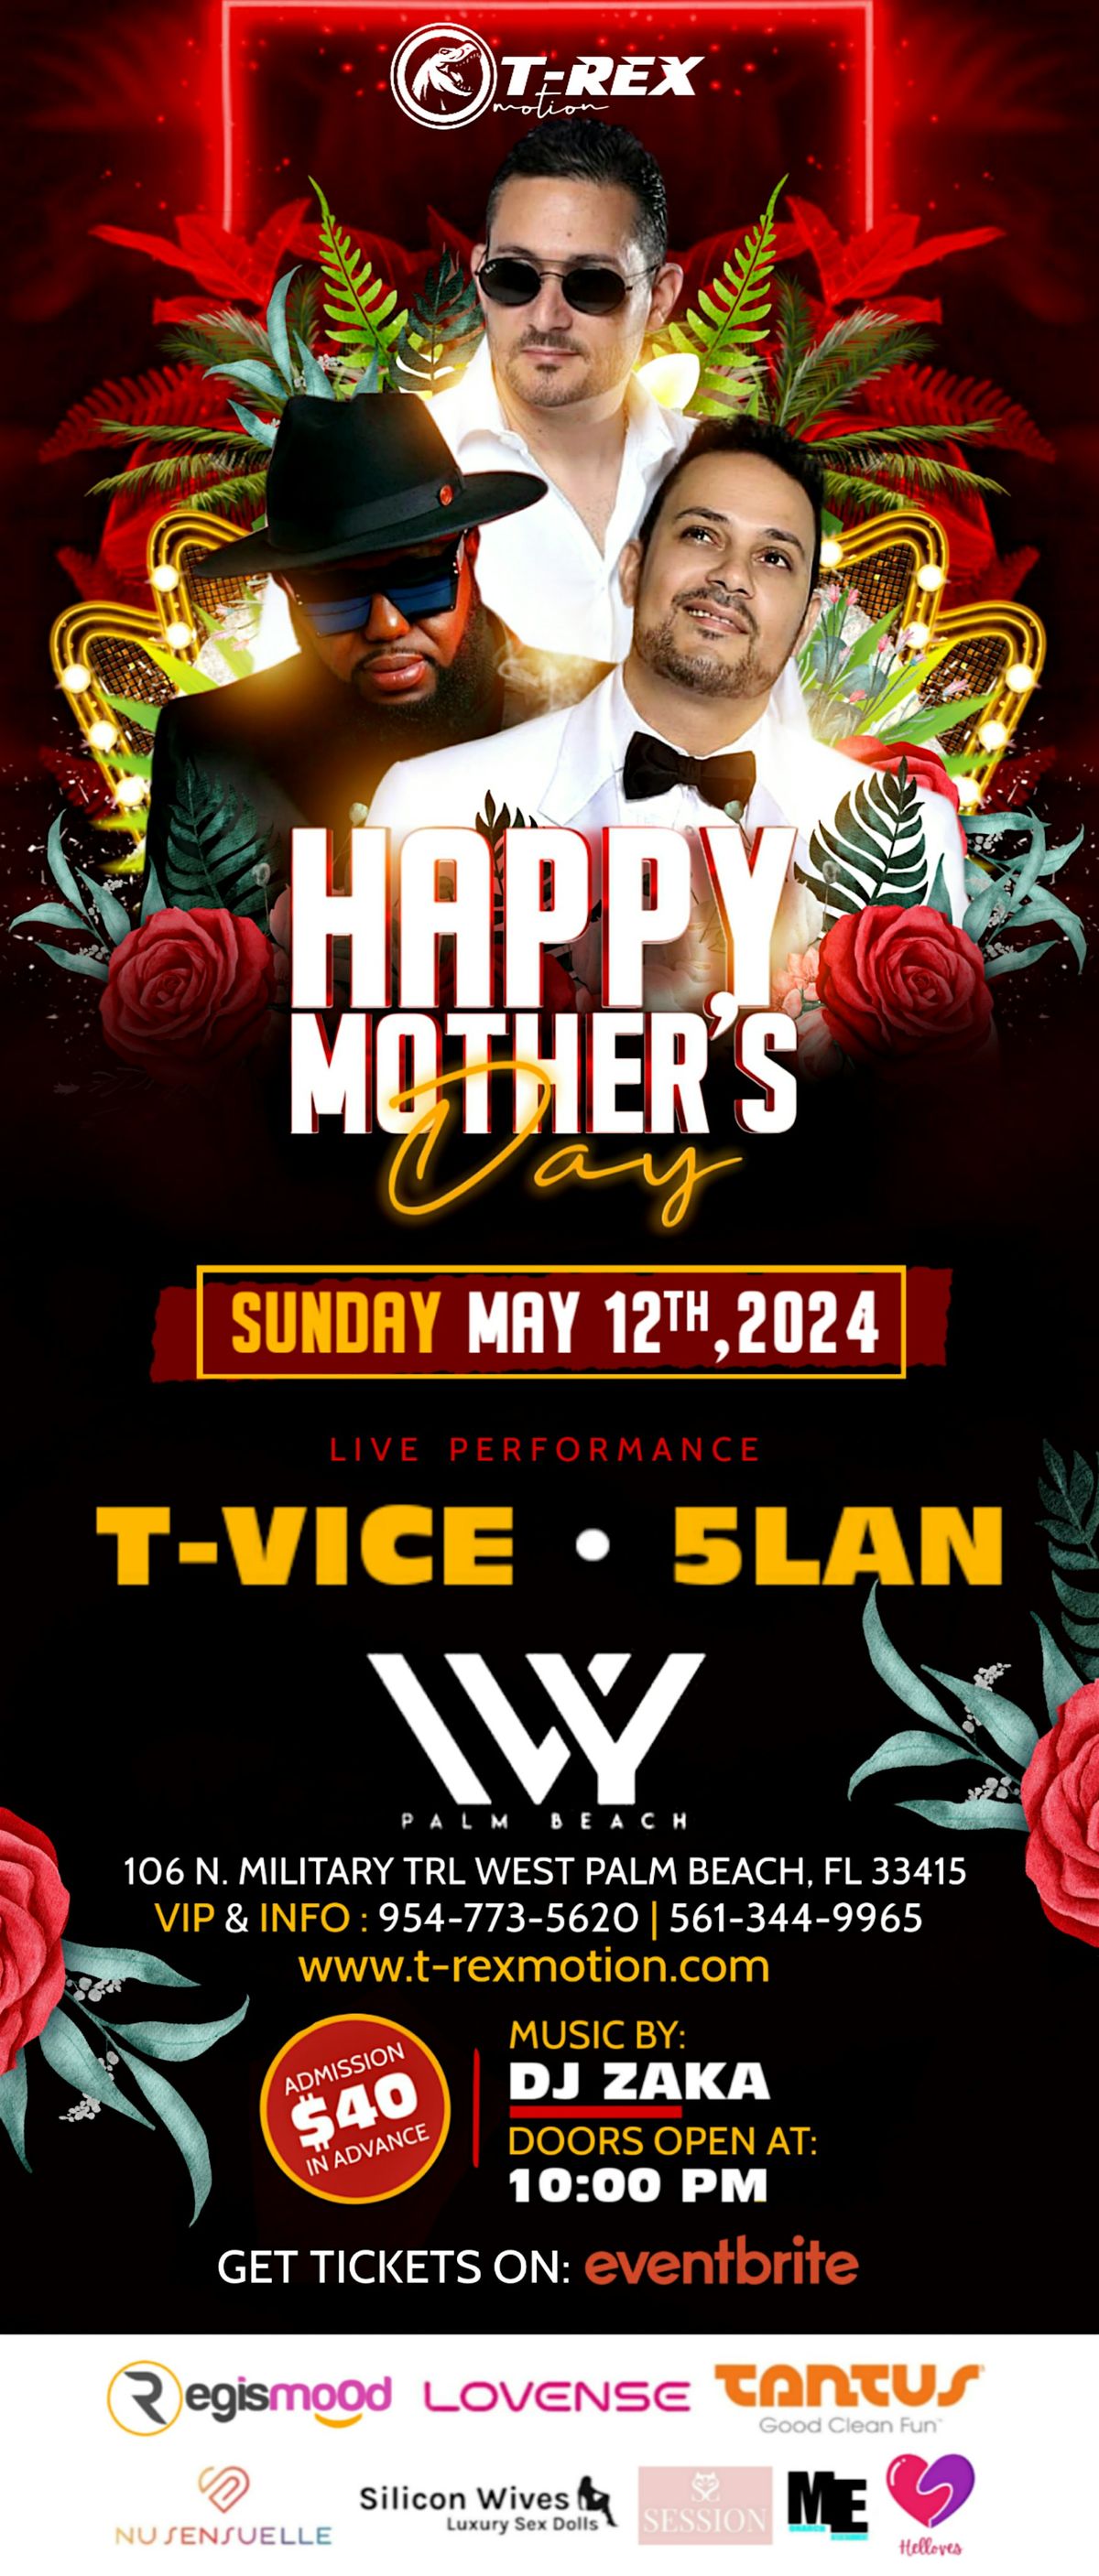 Happy Mother's Day T-VICE & 5LAN